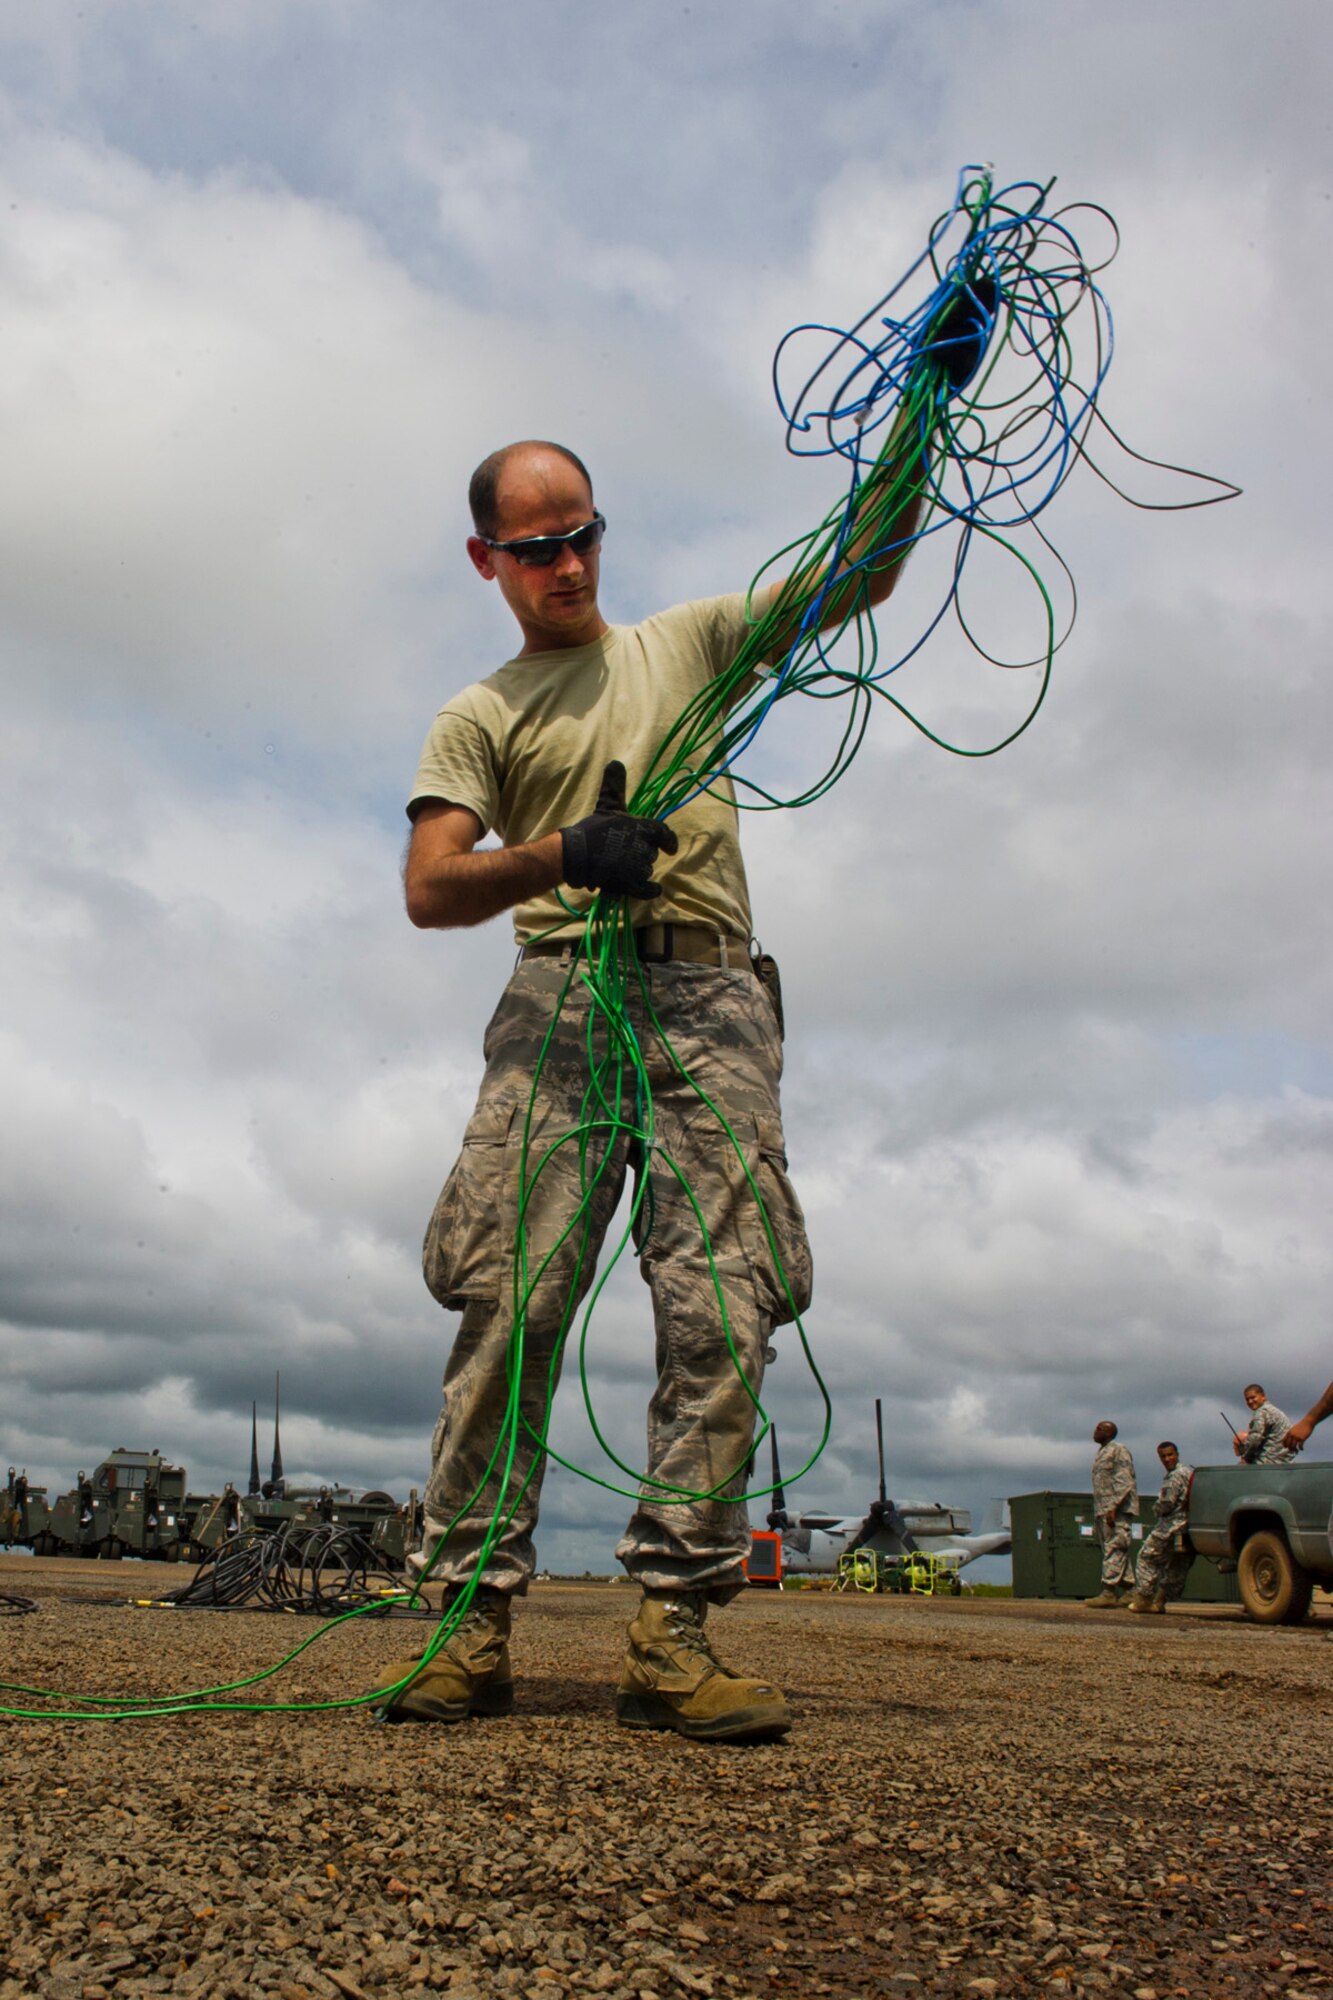 U.S. Air Force Staff Ben Meltzer from the Joint Task Force-Port Opening assigned to the 621st Contingency Response Wing stationed at Joint Base McGuire-Dix-Lakehurst, N.J., gathers communication wires as he prepares equipment for re-deployment after completing their mission at Roberts International Airport, Republic of Liberia, during Operation UNITED ASSISTANCE, Nov. 9, 2014. The JTF-PO established a hub for cargo distribution to help alleviate the increased traffic of airflow and cargo during OUA, a Department of Defense operation in Liberia to provide logistics, training and engineering support to U.S. Agency for International Development-led efforts to contain the Ebola virus outbreak in western Africa. (U.S. Air Force photo/Staff Sgt. Gustavo Gonzalez/RELEASED)